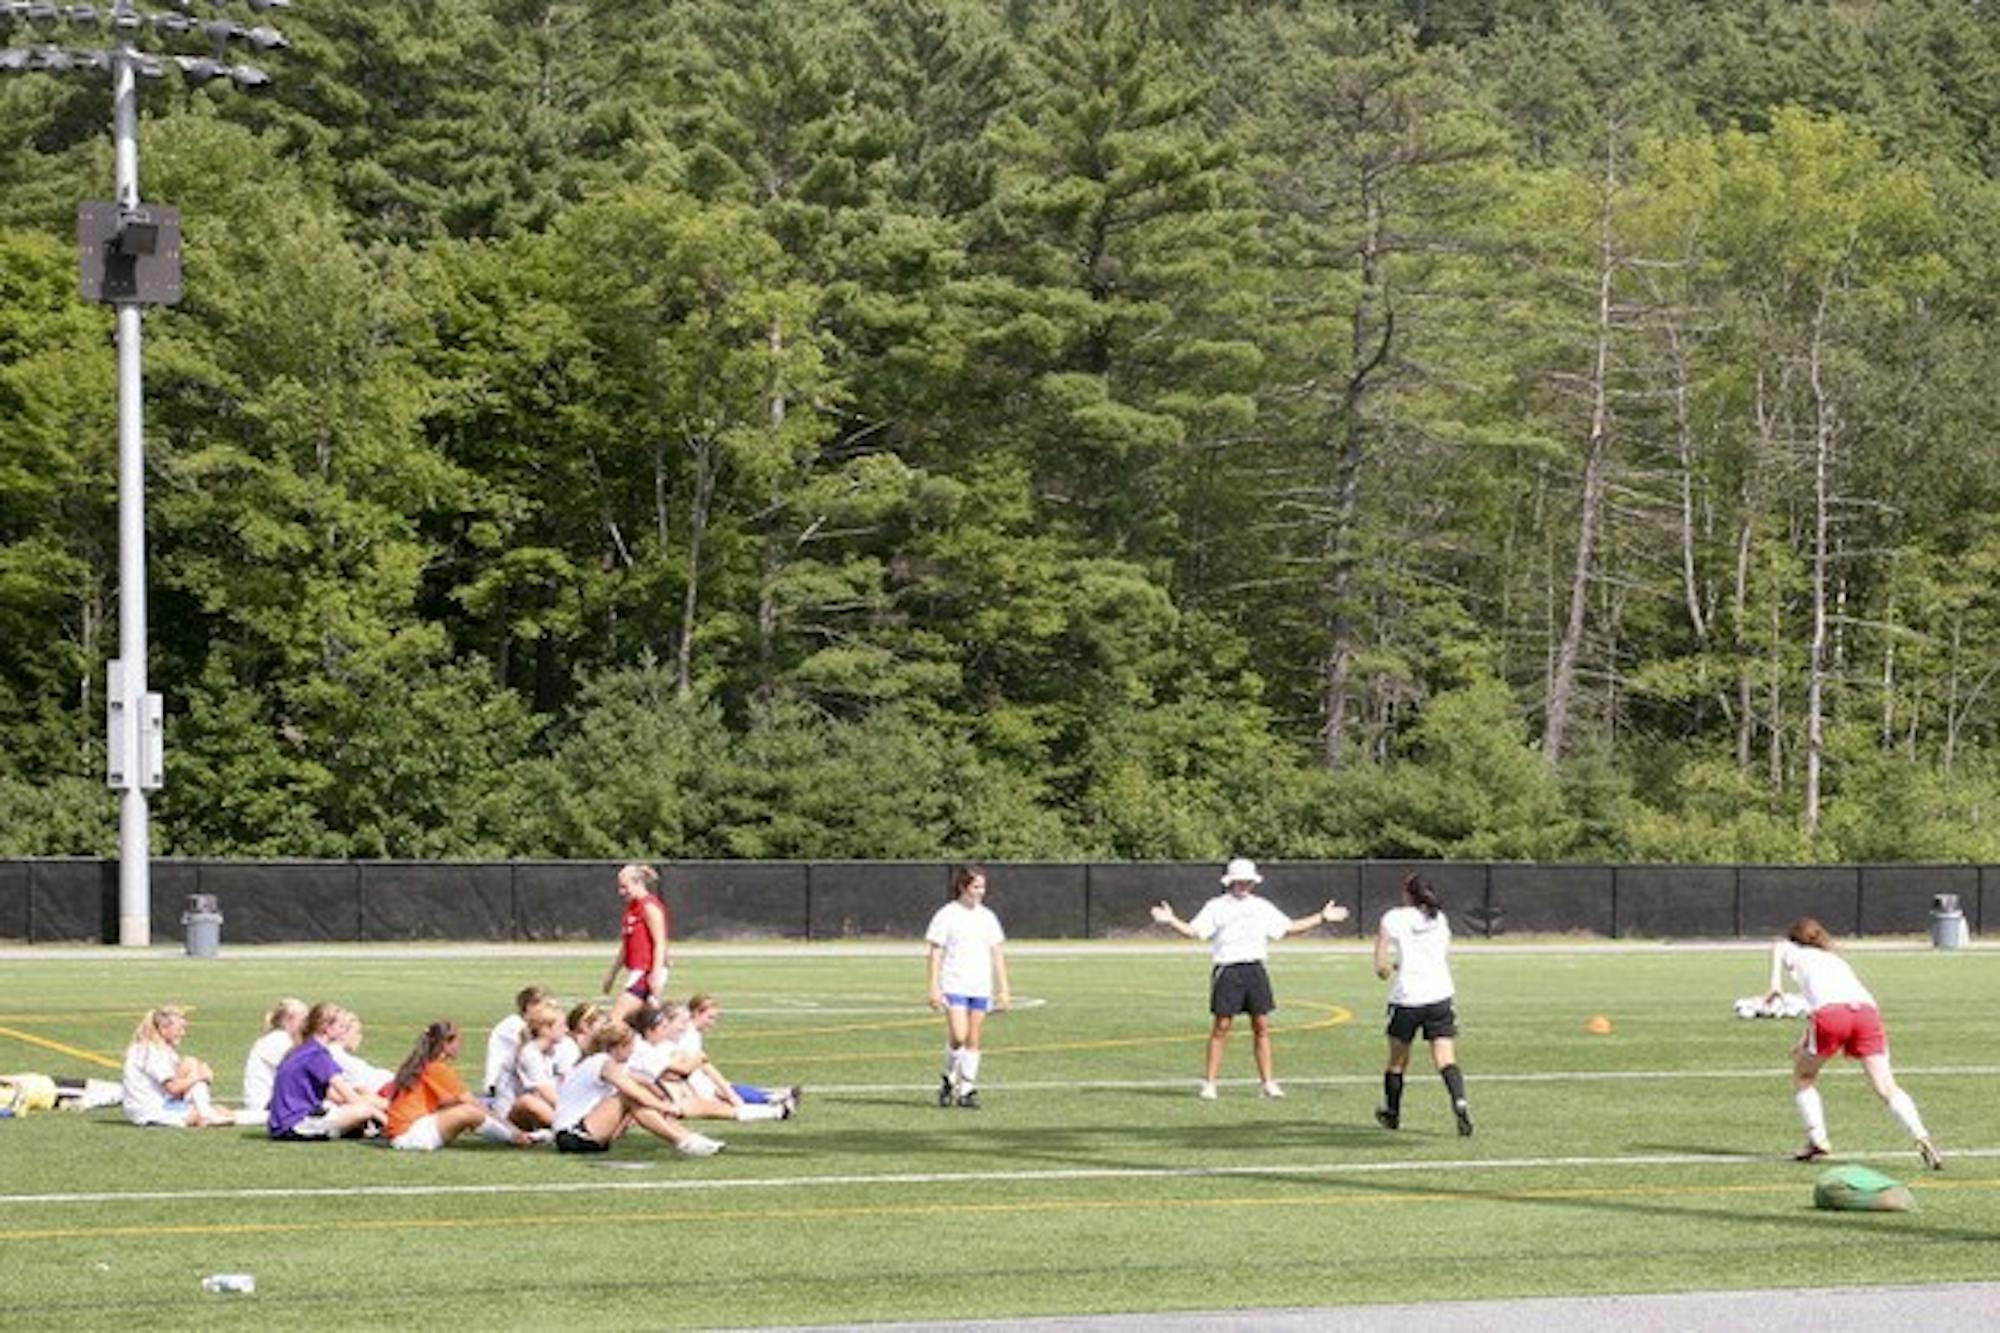 Boys and girls of all ages come to Dartmouth summer sports camps to improve their game.